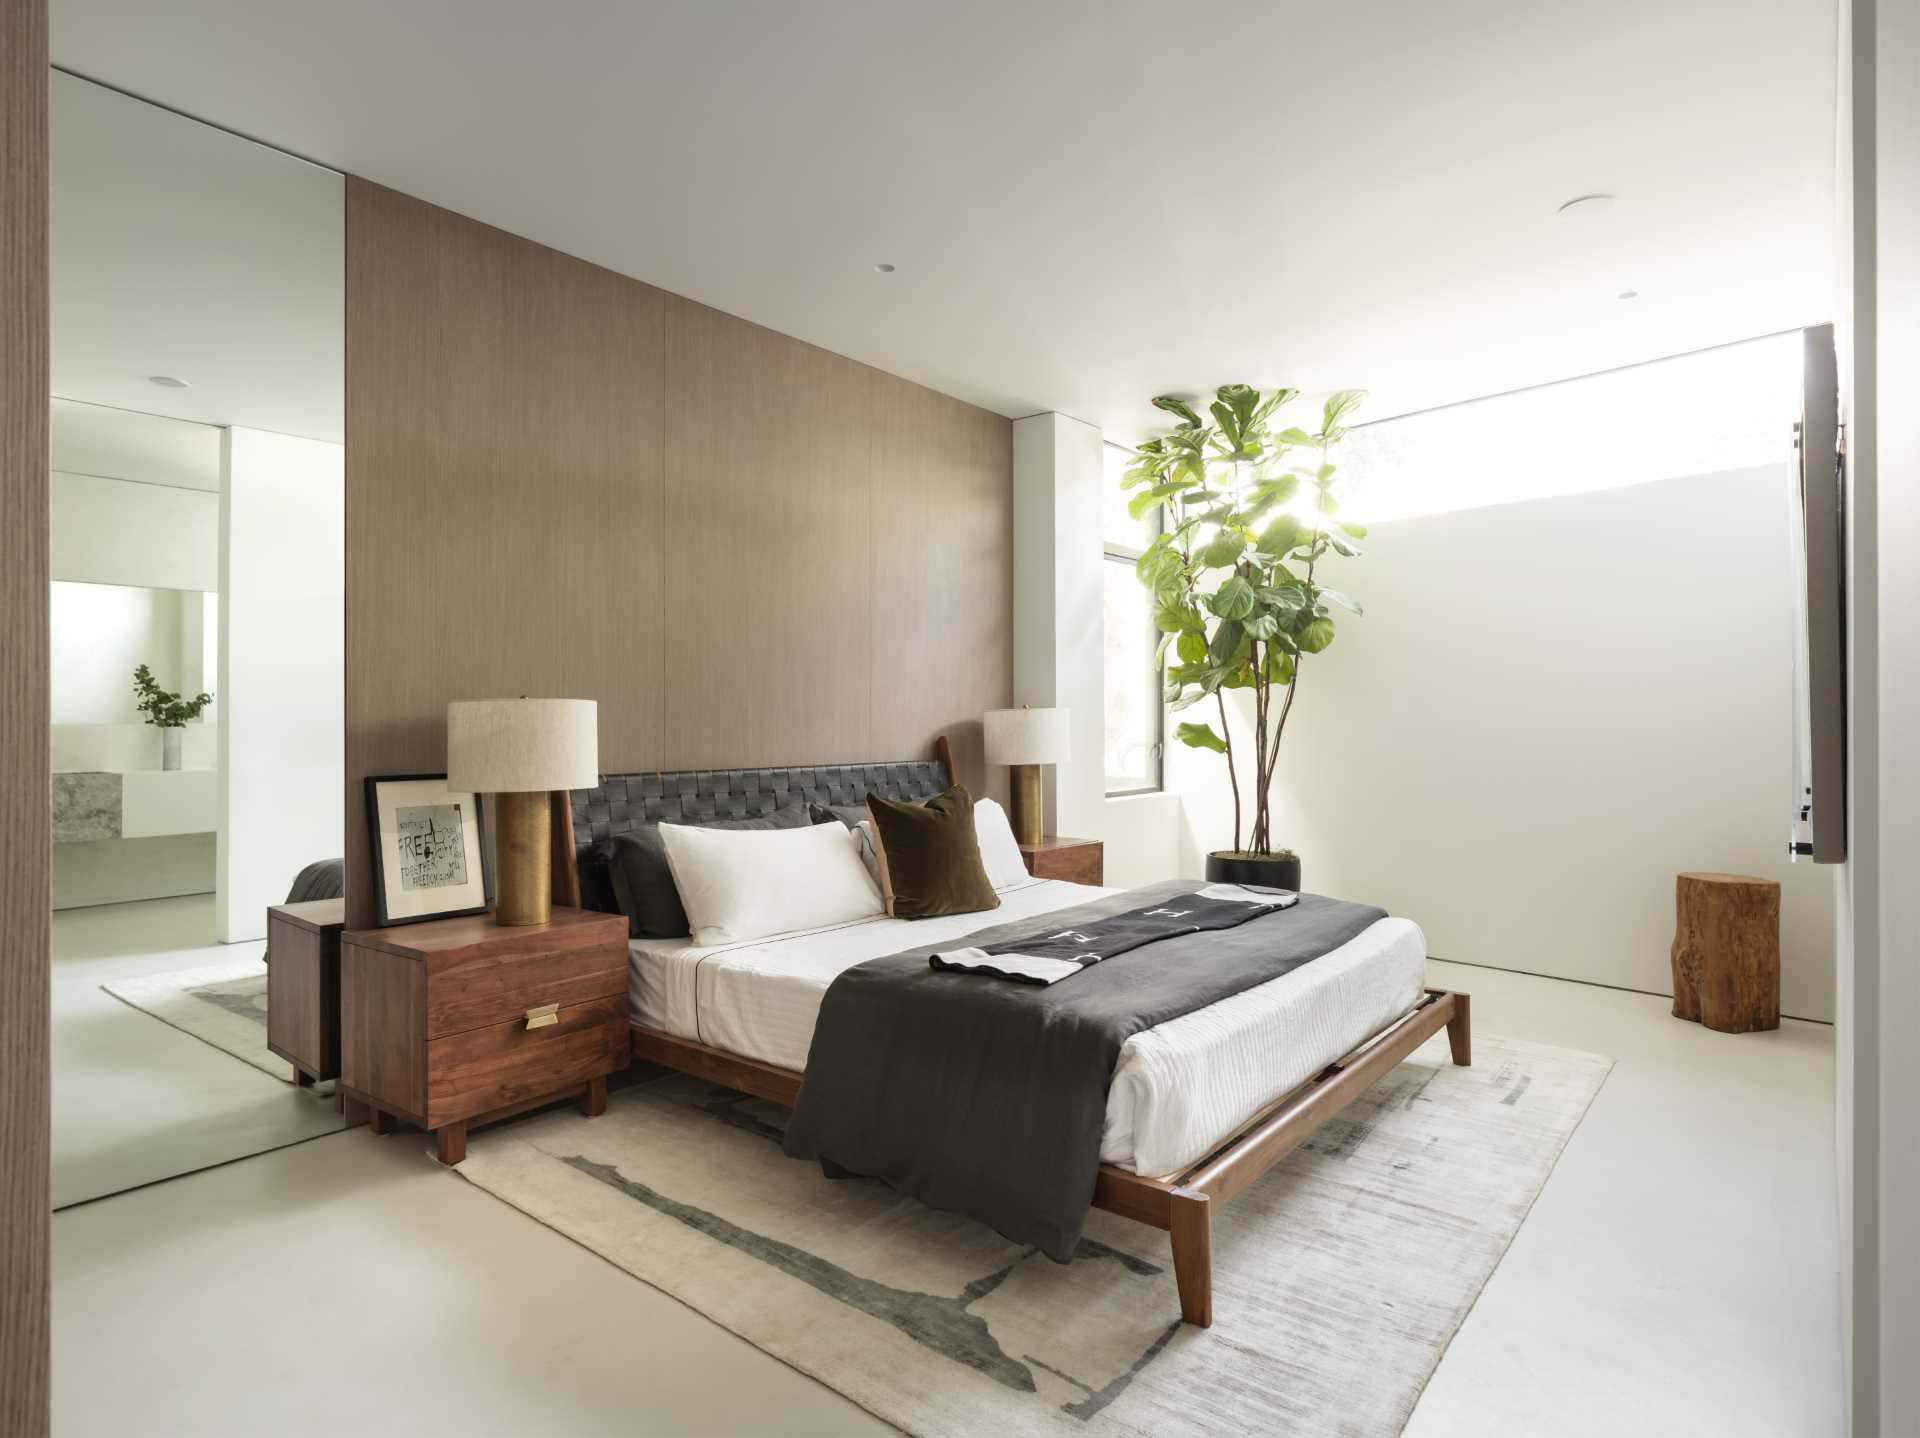 A modern bedroom with a wood accent wall and a high window.